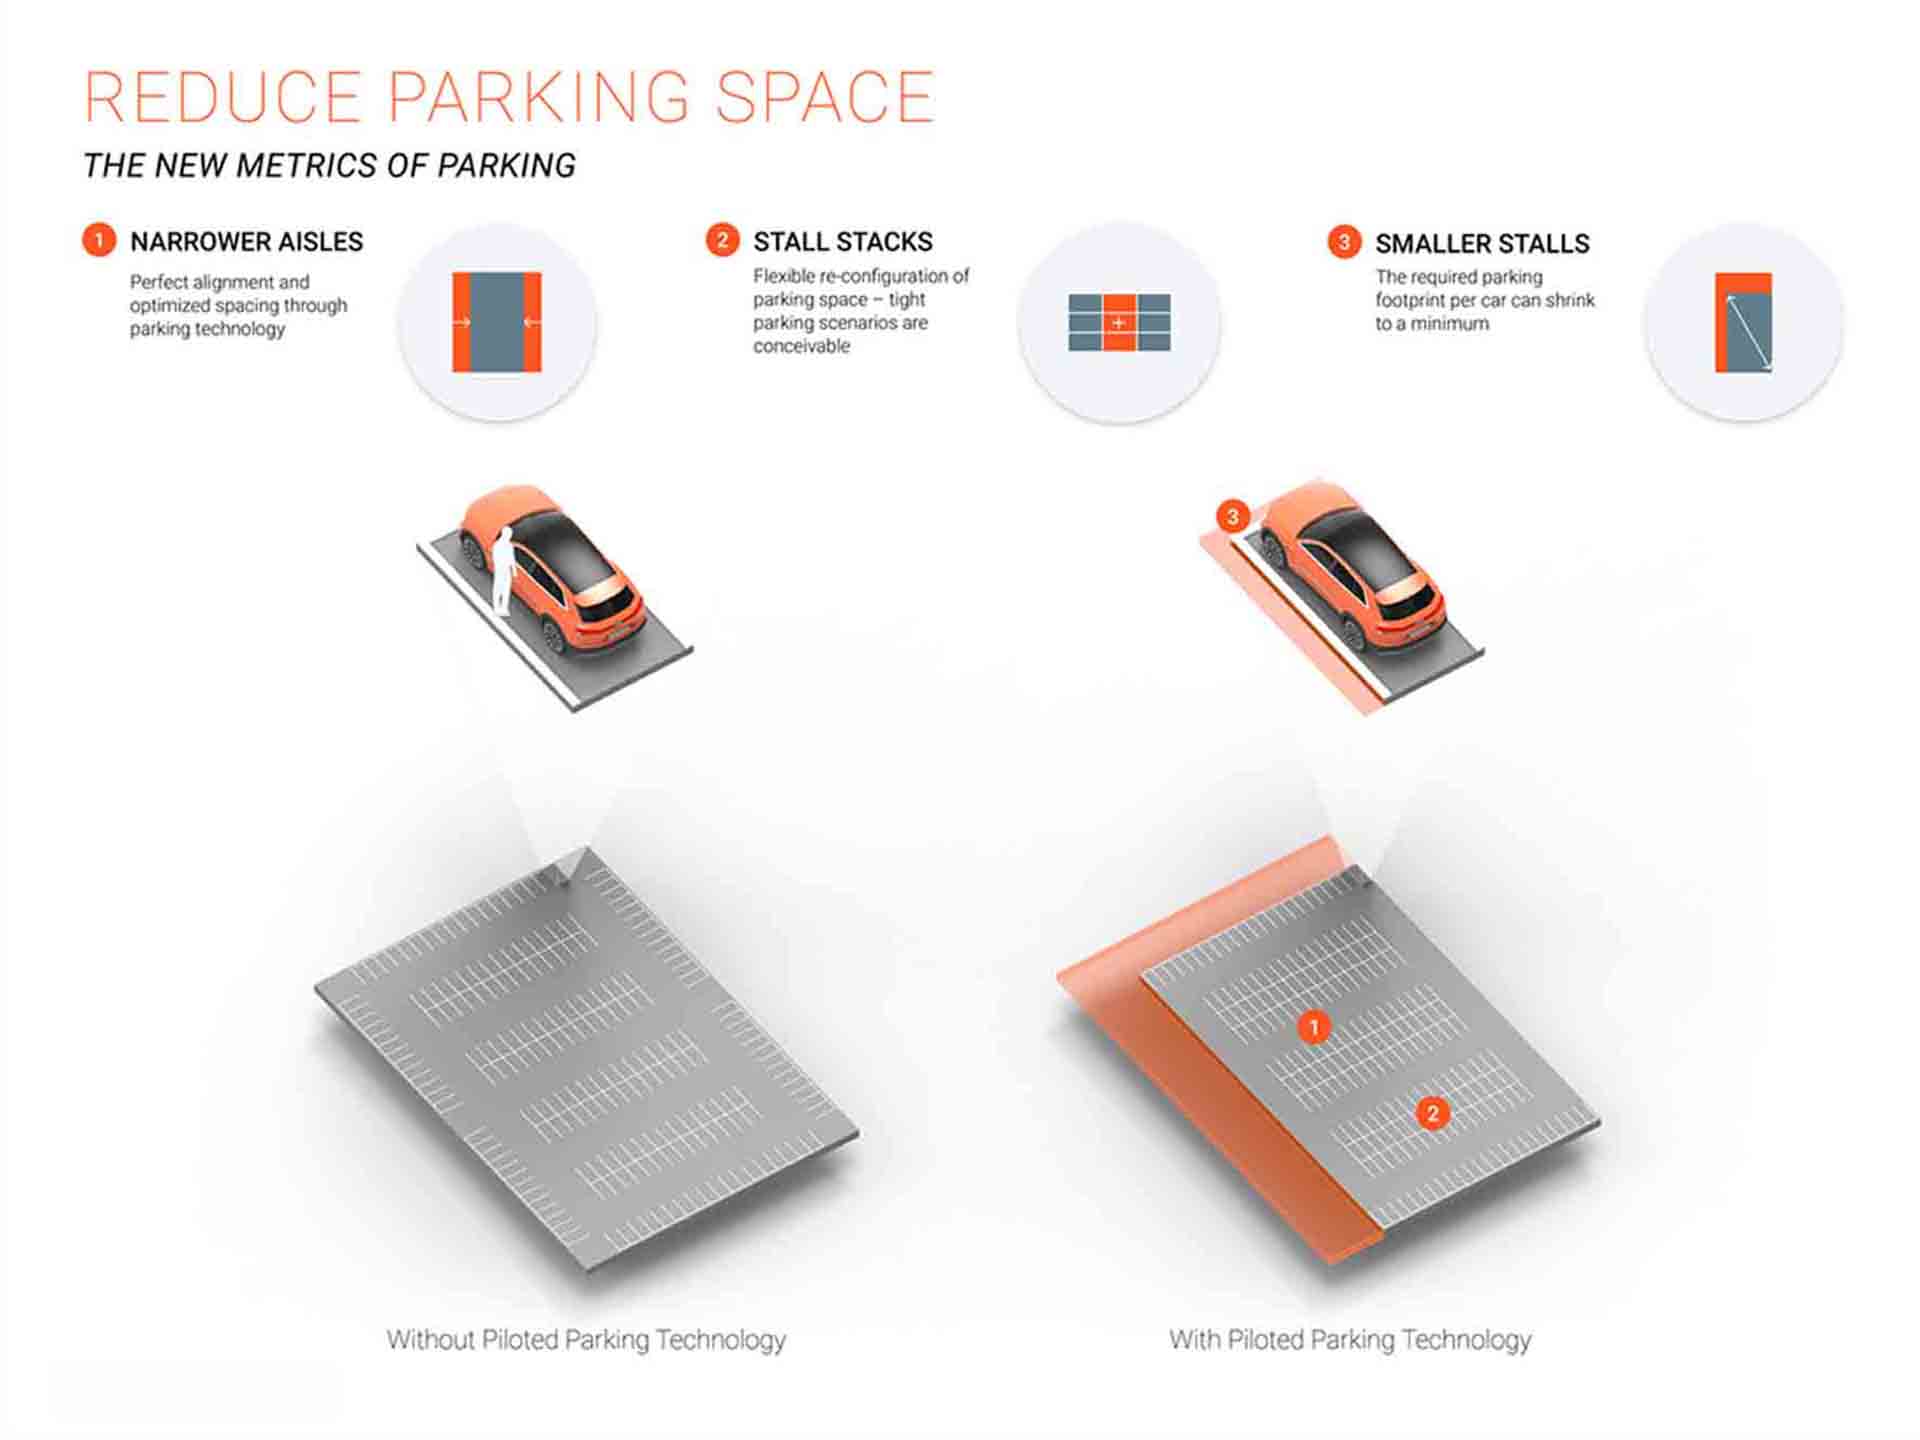 Piloted parking: reduce parking space